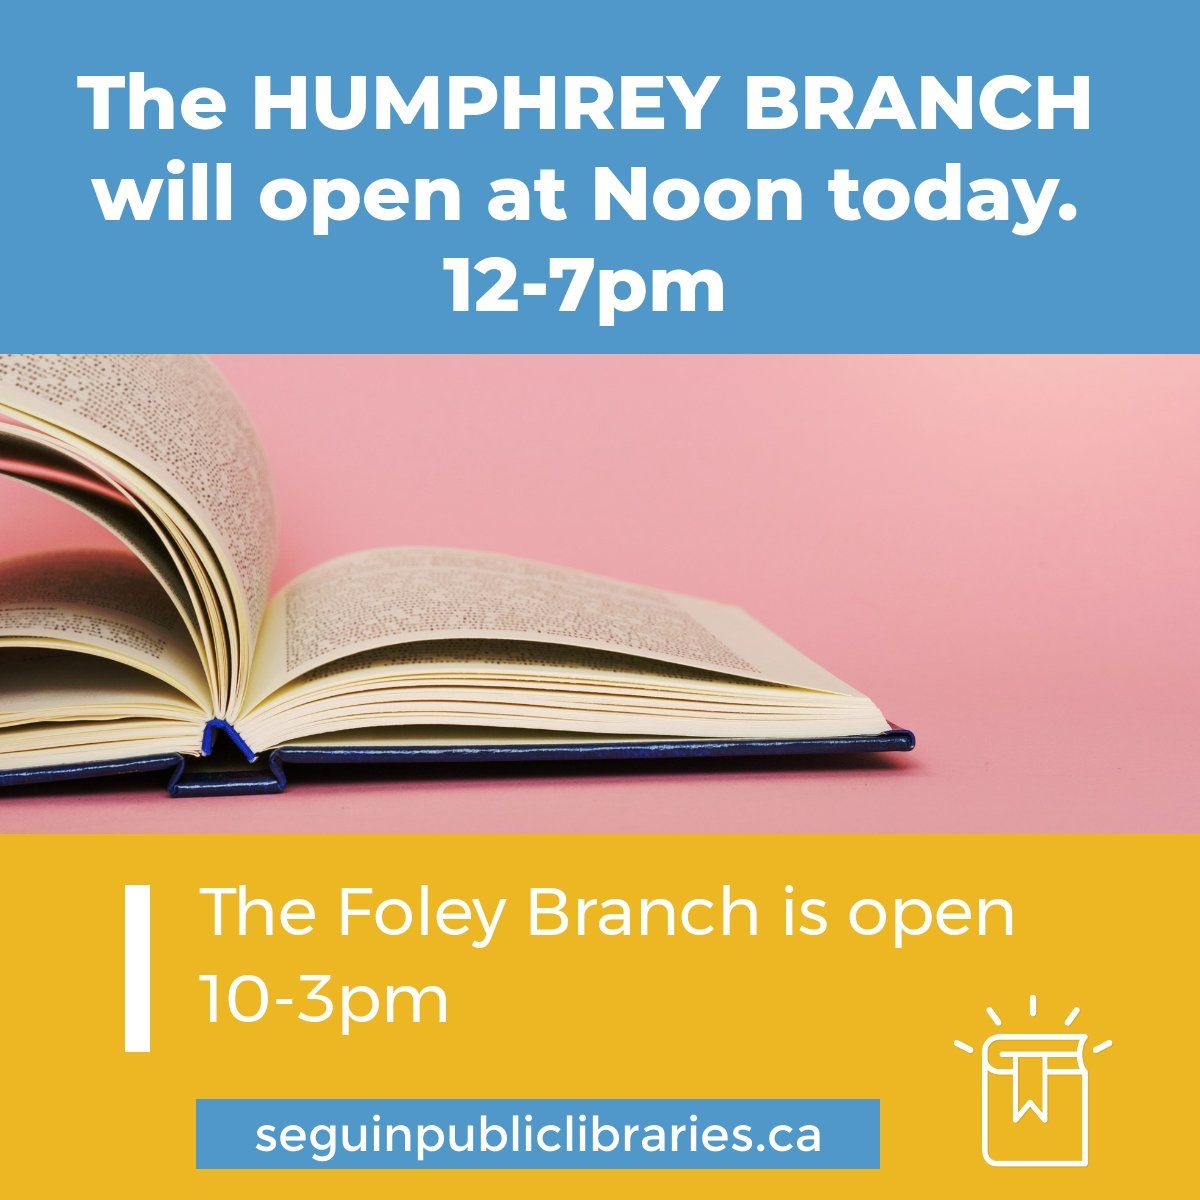 The Humphrey branch will being opening at Noon today, 12-7pm, and the Foley branch is open 10-3pm.  We look forward to having the Foley Book Club meeting today at 2pm to review September's Pick: The Five People You Meet in Heaven by Mitch Albom. #librarynews #libraryupdate